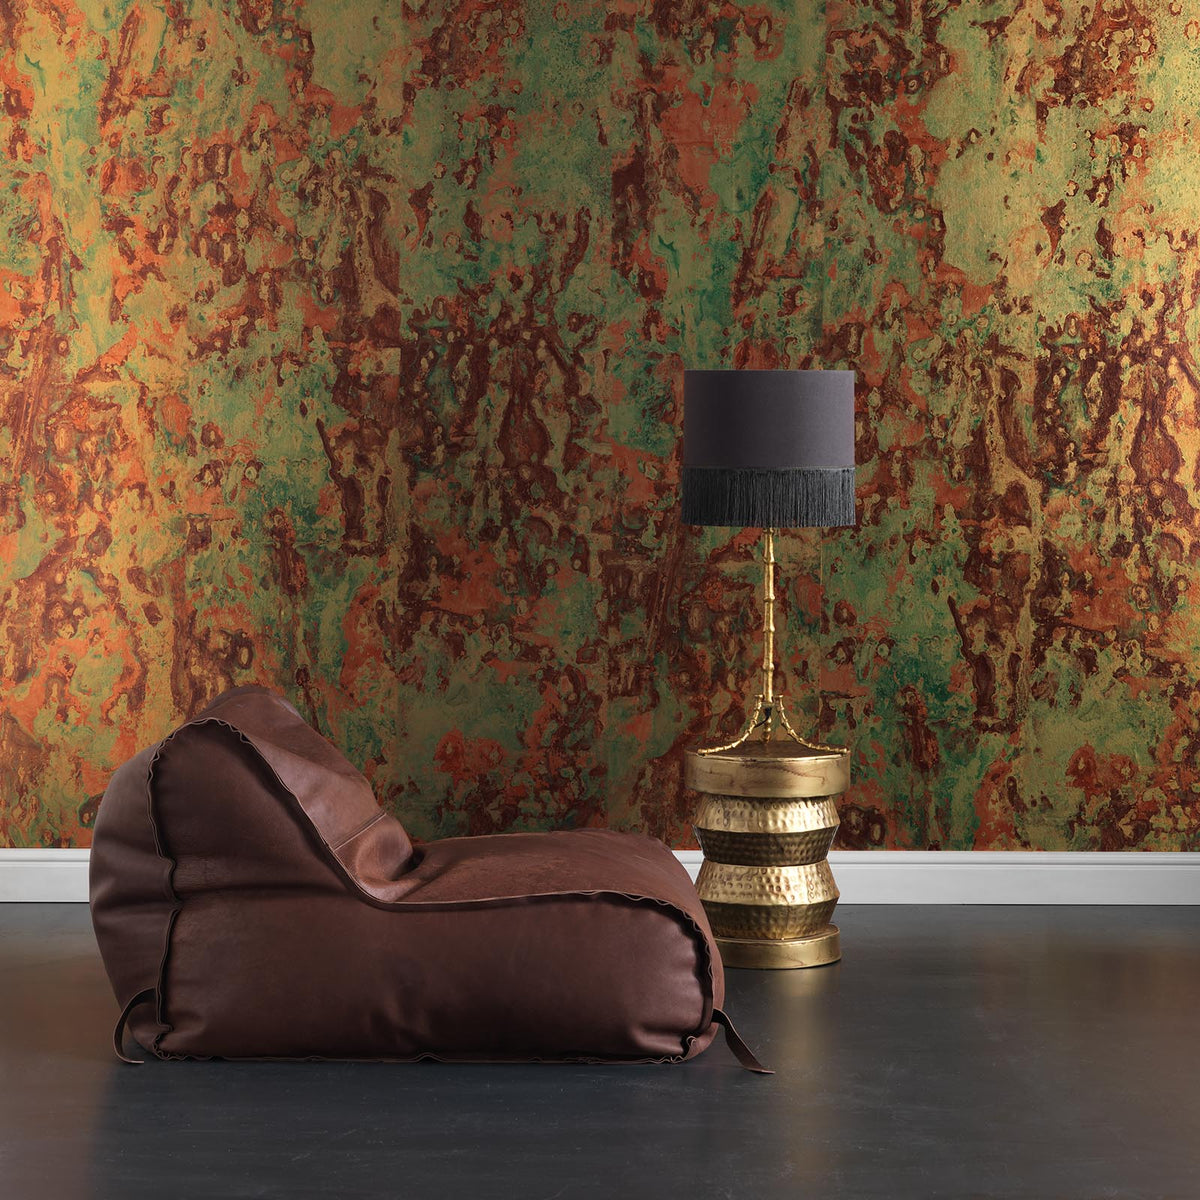 PHC-02 Spoiled Copper Metallic wallpaper by Piet Hein Eek for NLXL